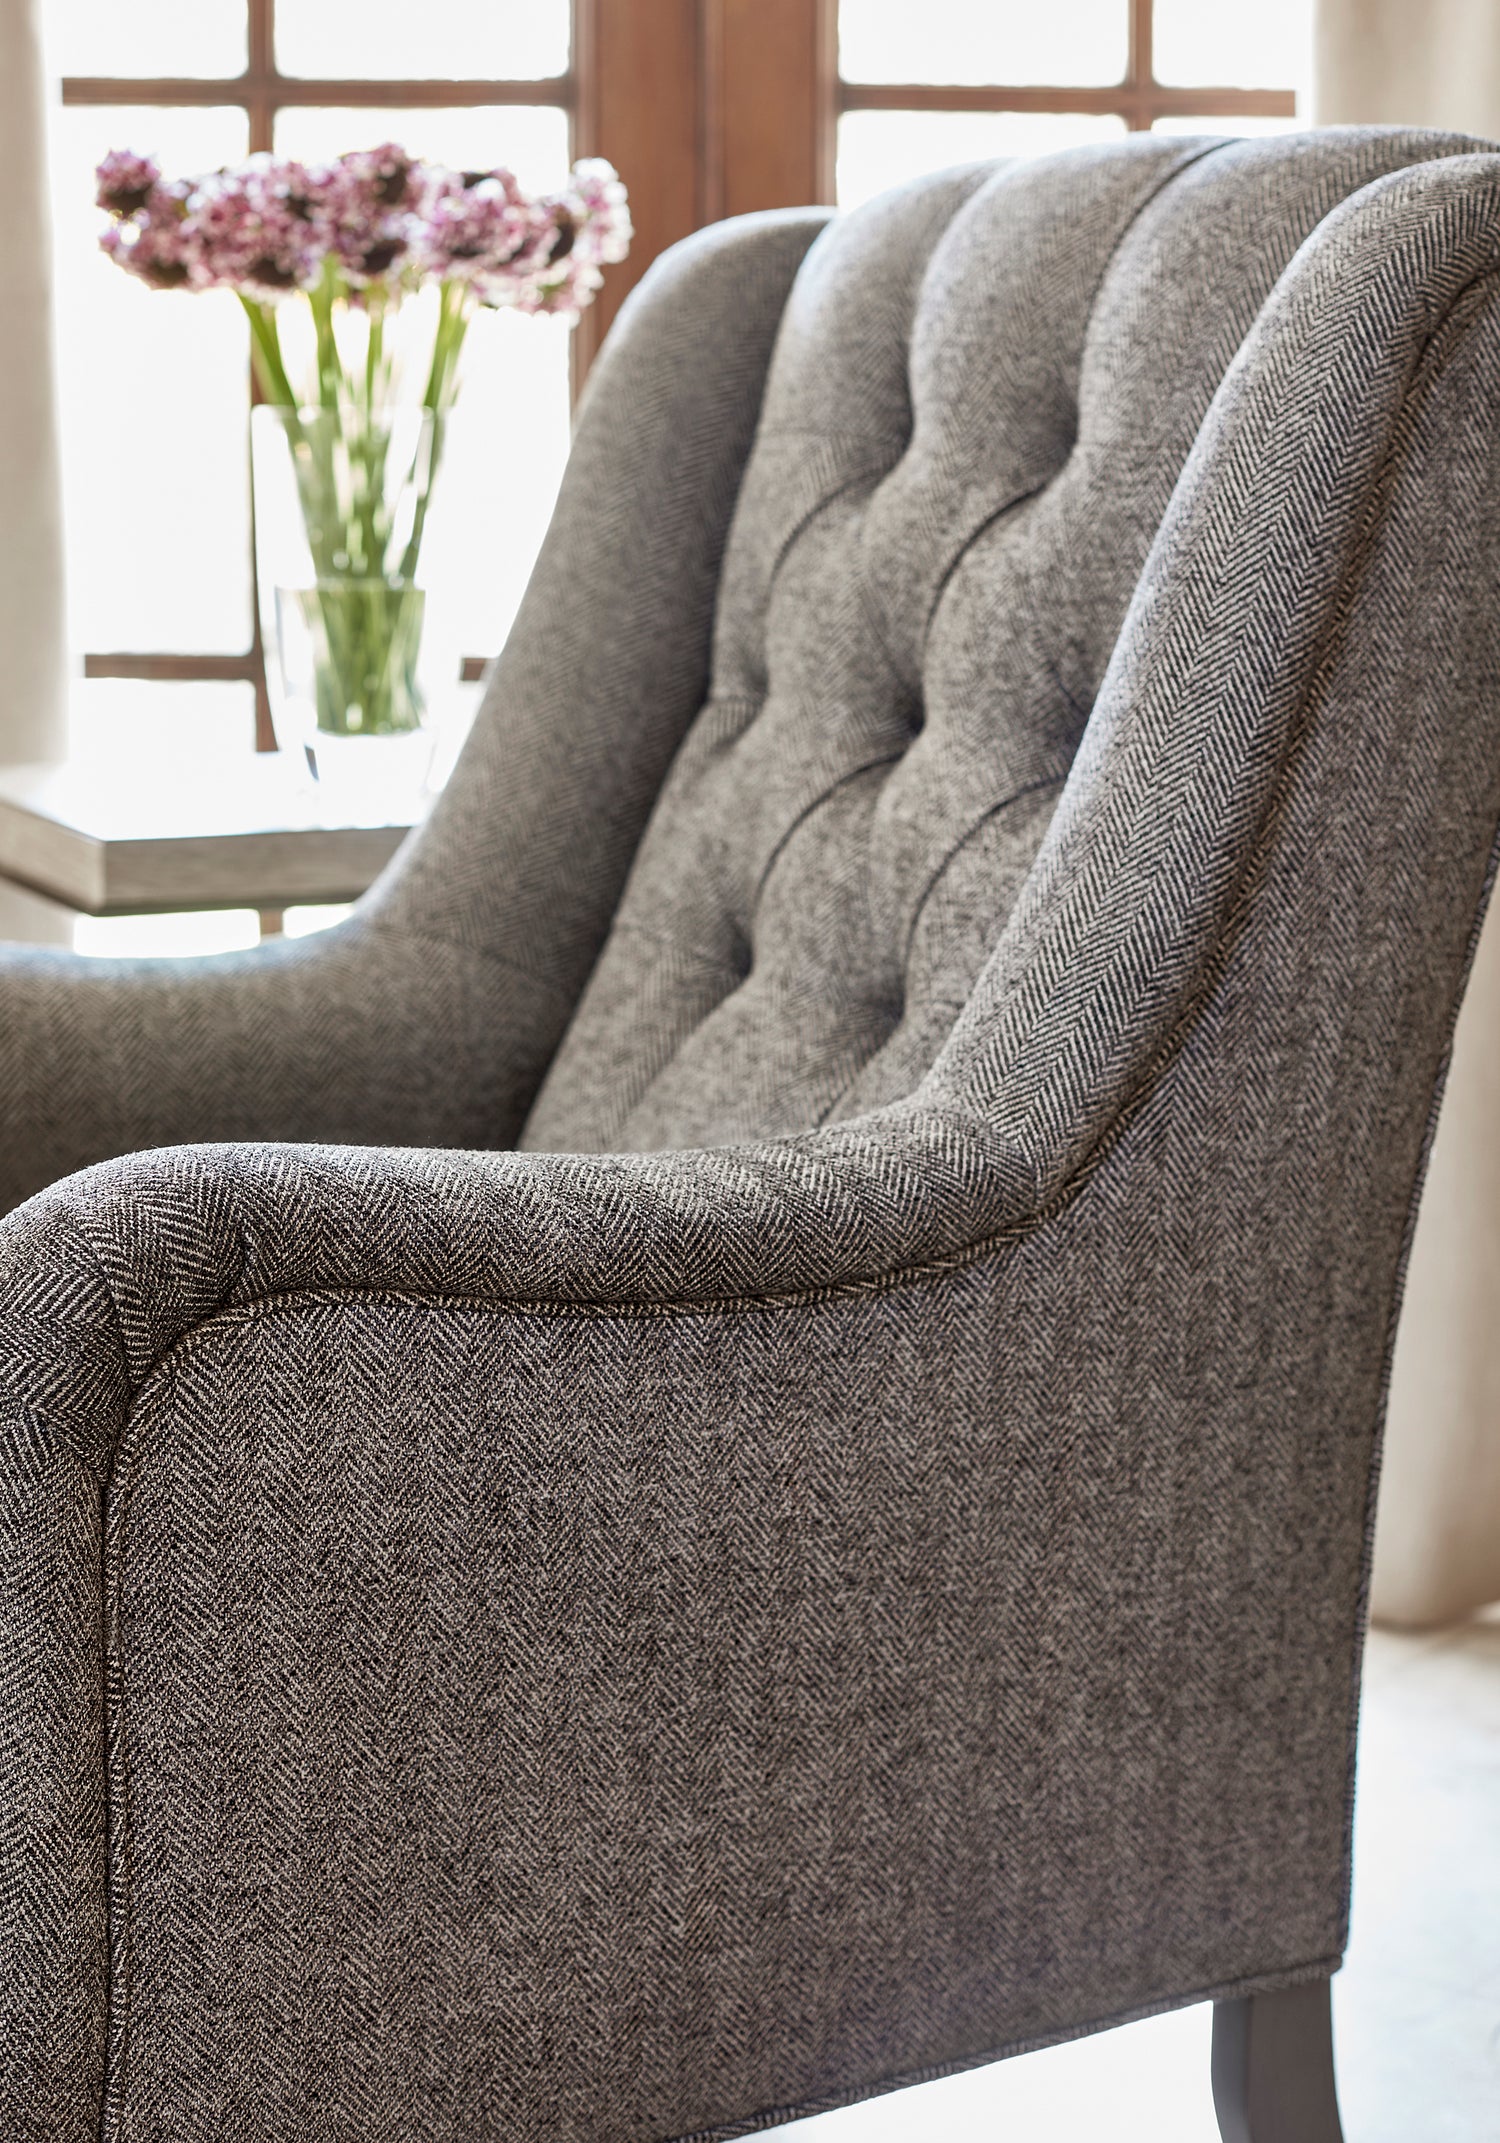 Detailed view of Newport Wing Chair in Hadrian Herringbone woven fabric in charcoal color - pattern number W80713 by Thibaut in the Woven Resource Vol 11 Rialto collection